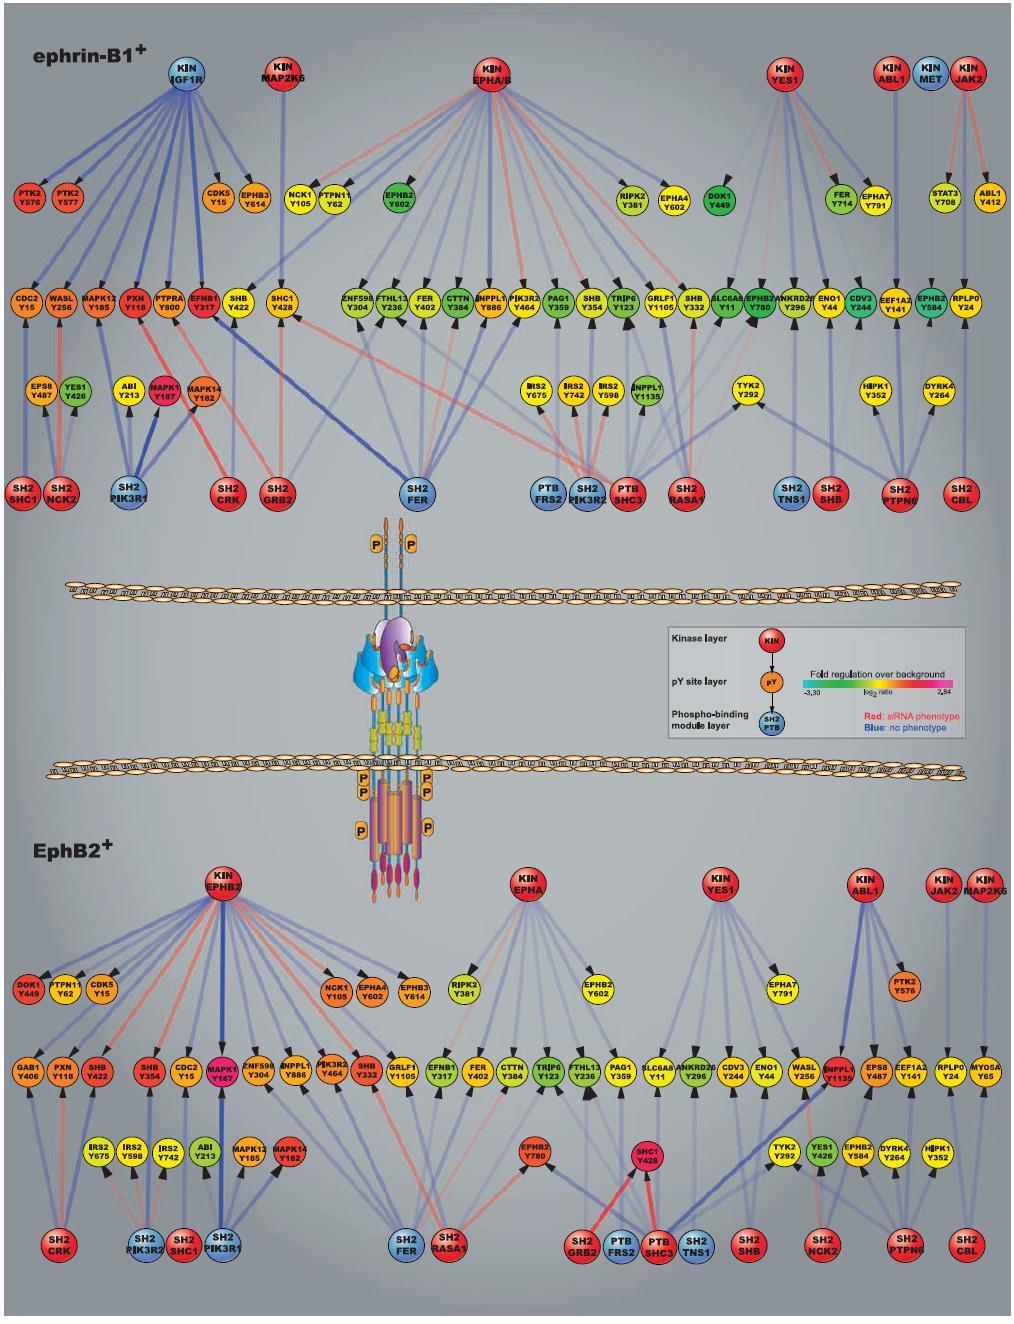 Cell-specific signaling network models in EphB2- and ephrin-b1- expressing cells Cell-specific information flow in EphB2+ and ephrin-b1+ cells is shown in the form of modular protein networks with